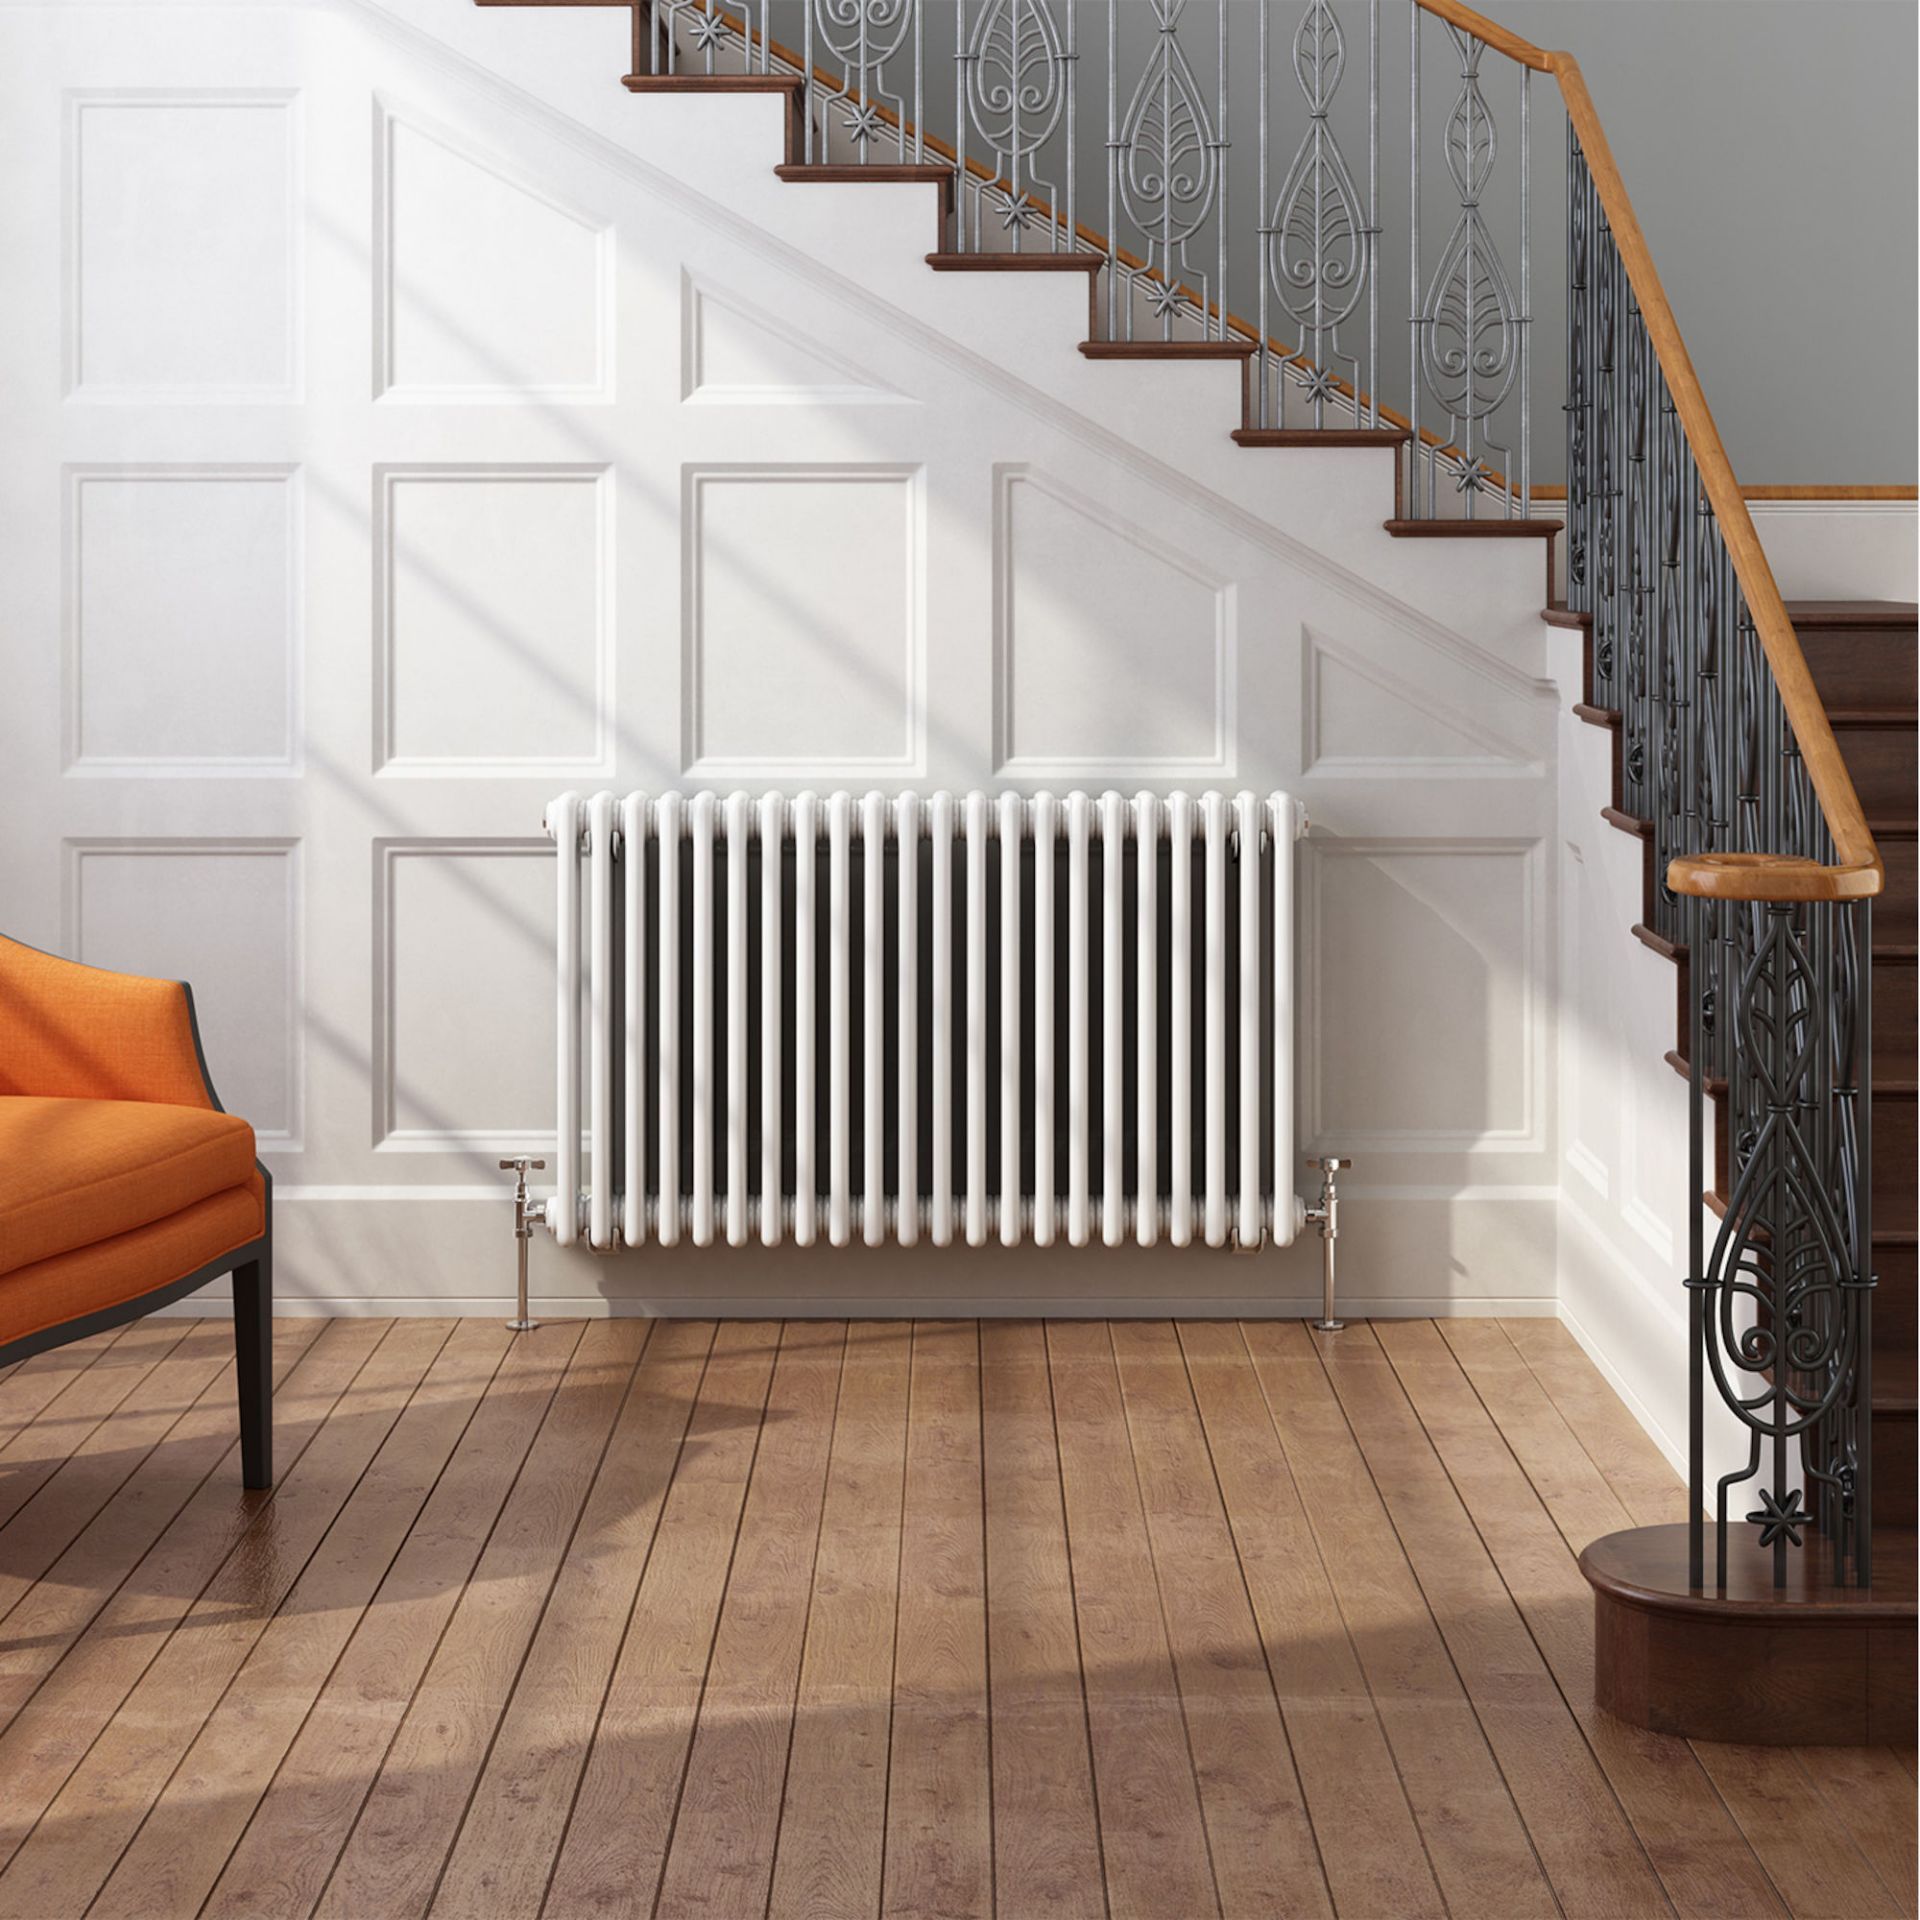 (ED14) 600x1226mm White Double Panel Horizontal Colosseum Traditional Radiator. RRP £530.99. Made